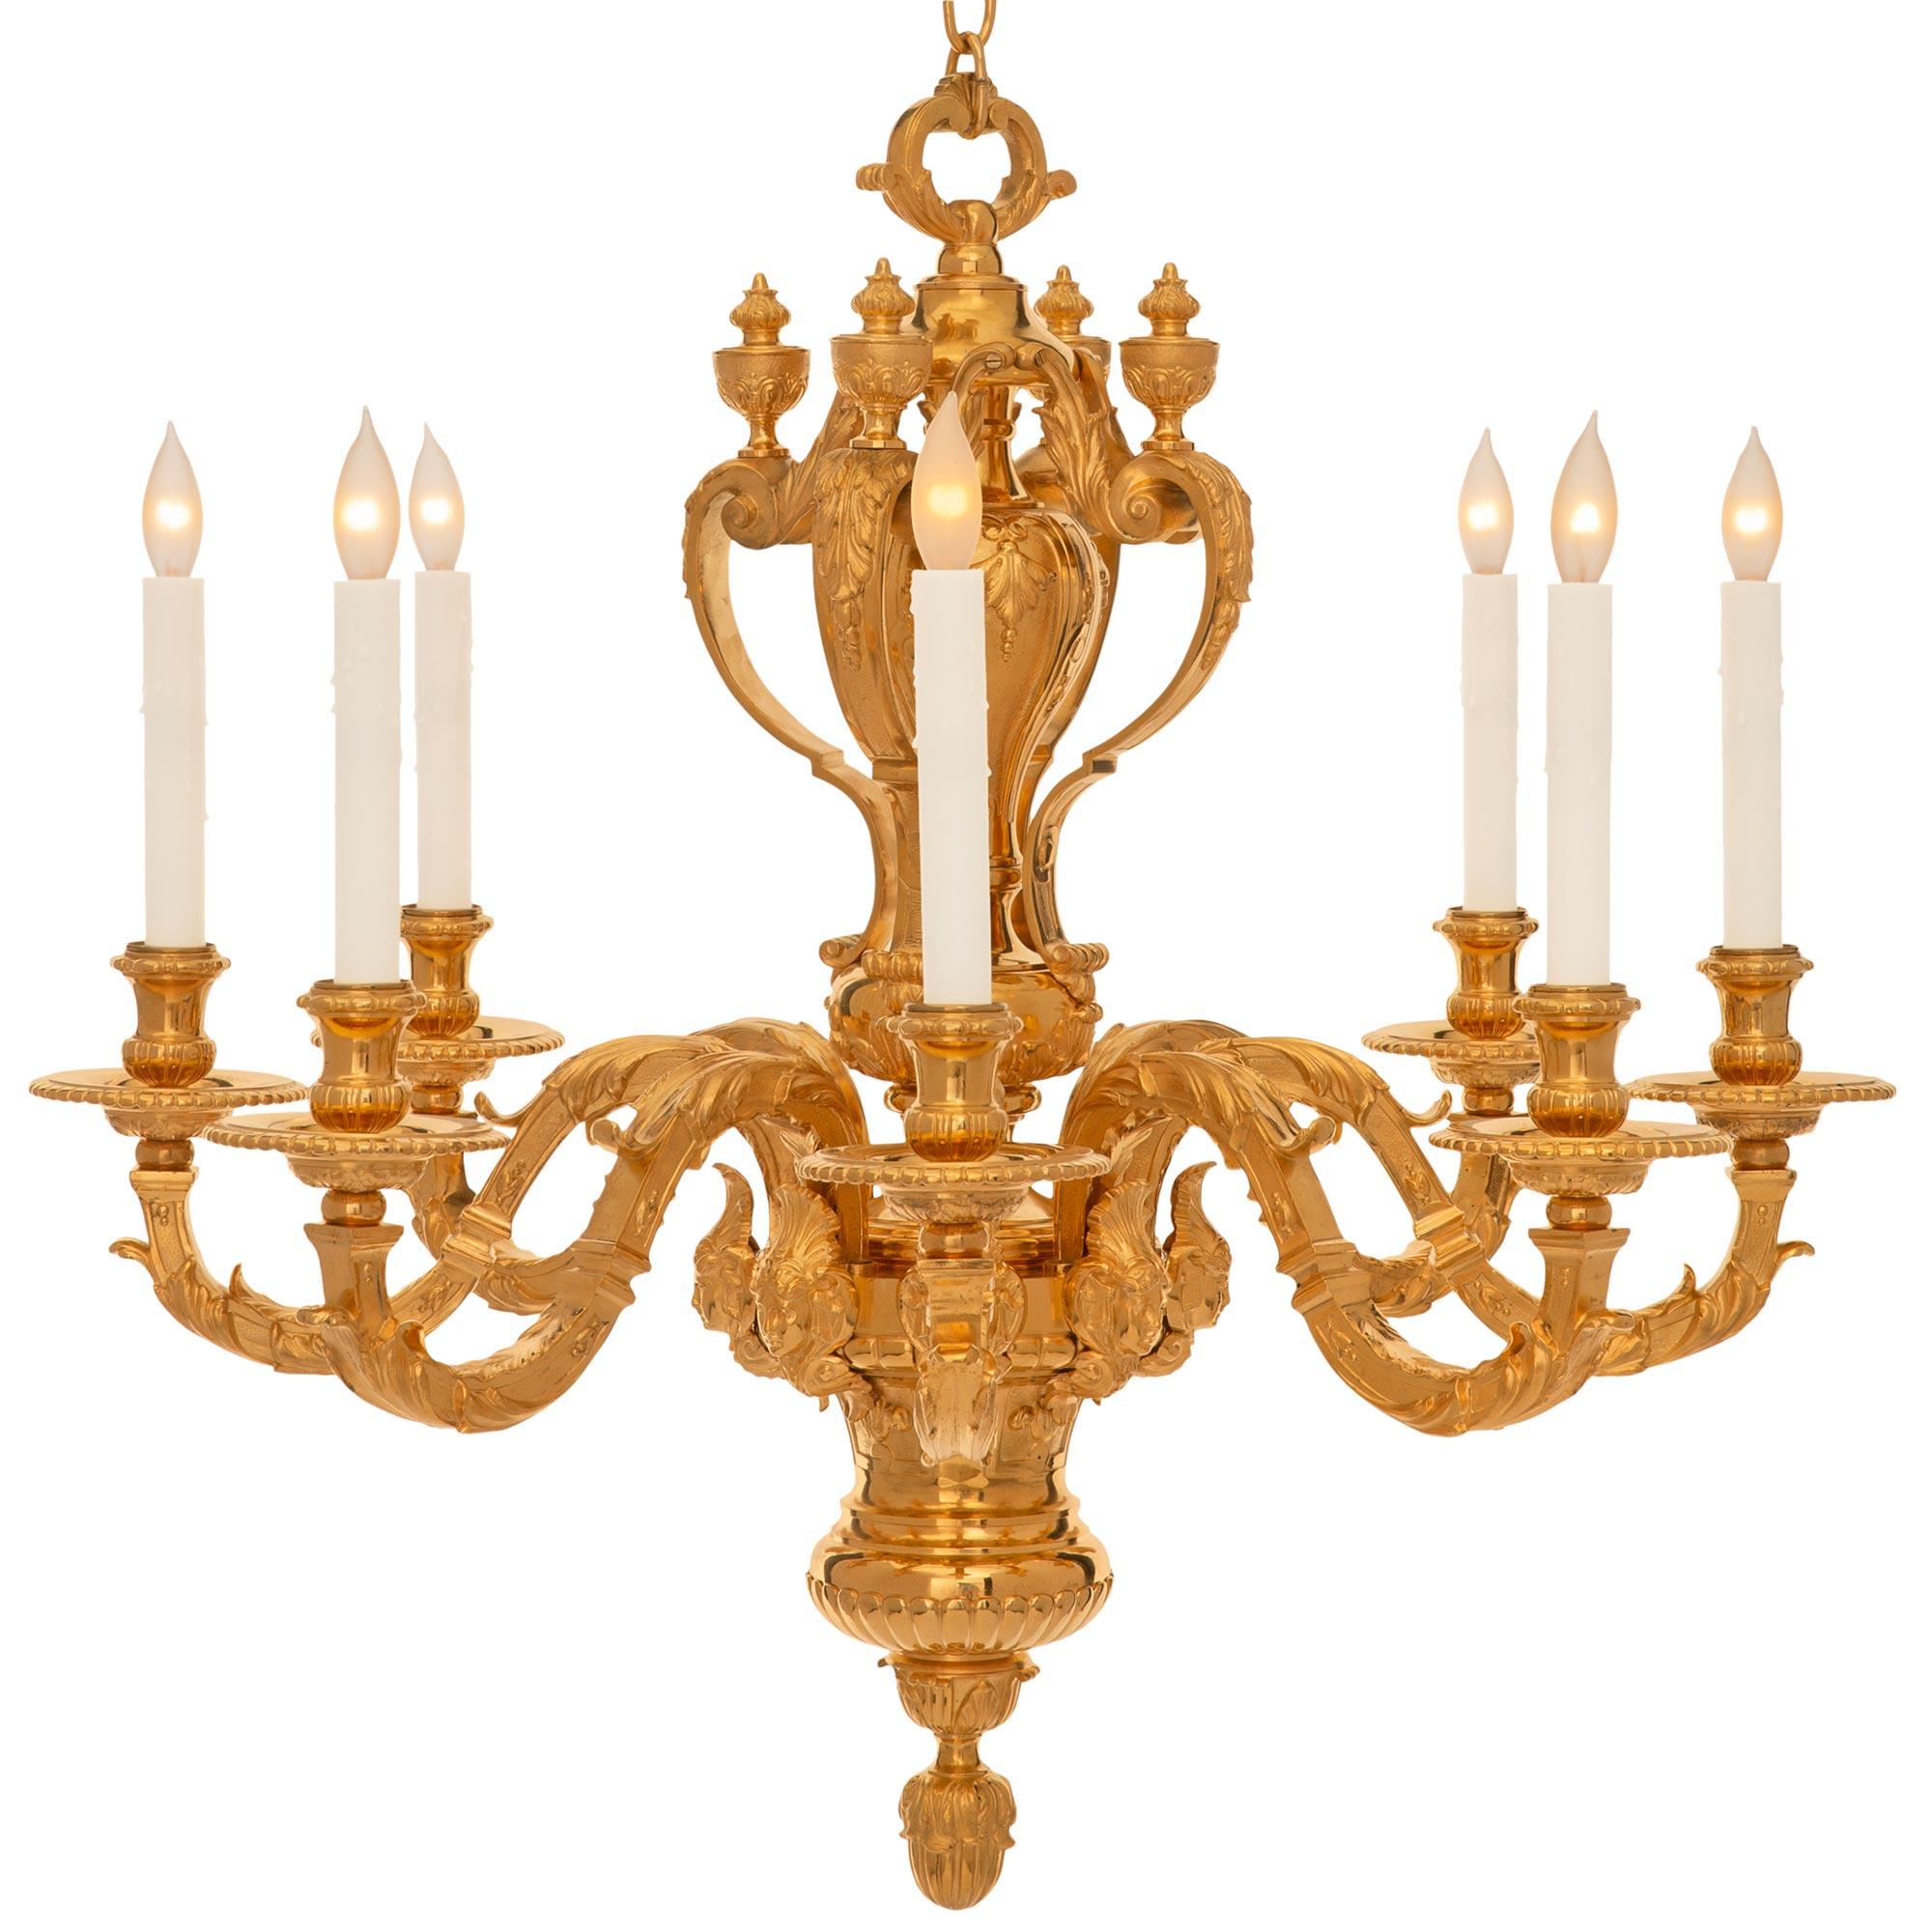 A most impressive French 19th century Louis XVI st. ormolu chandelier. The eight arm chandelier is centered by a striking bottom foliate finial below a reeded design and the elegantly curved body decorated with richly chased reserves of beautiful